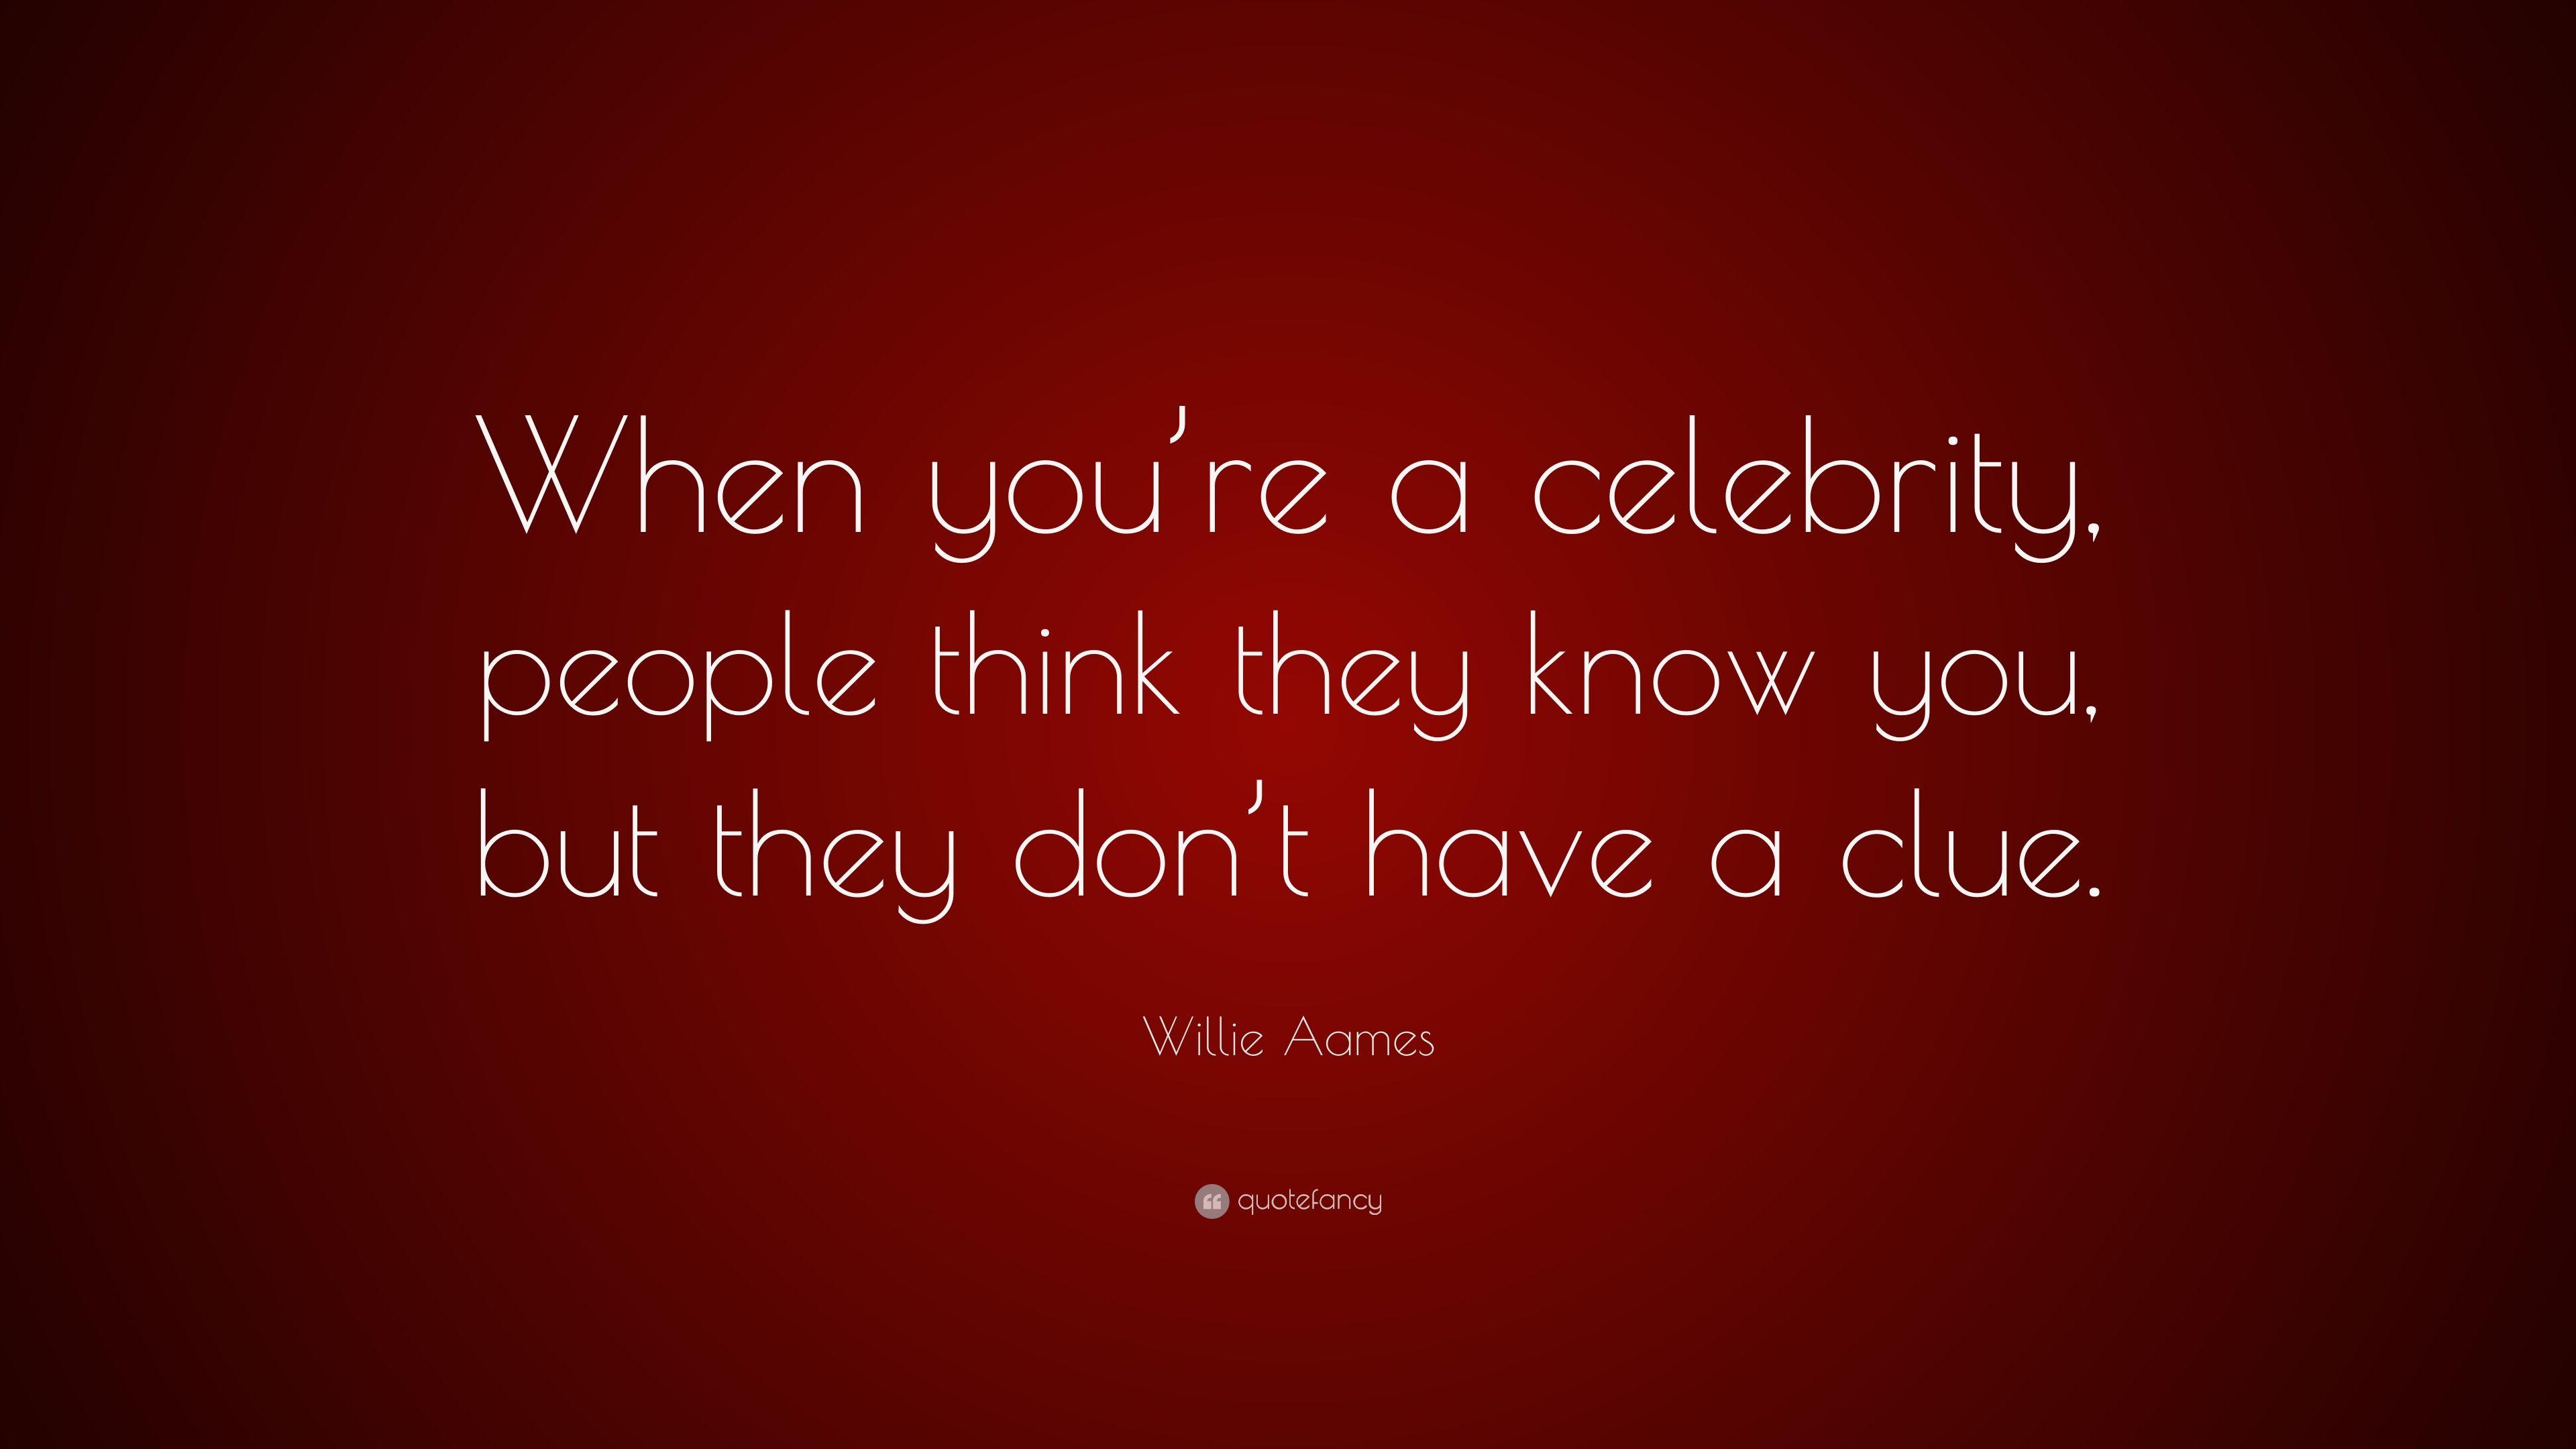 Willie Aames Quote: “When you're a celebrity, people think they know